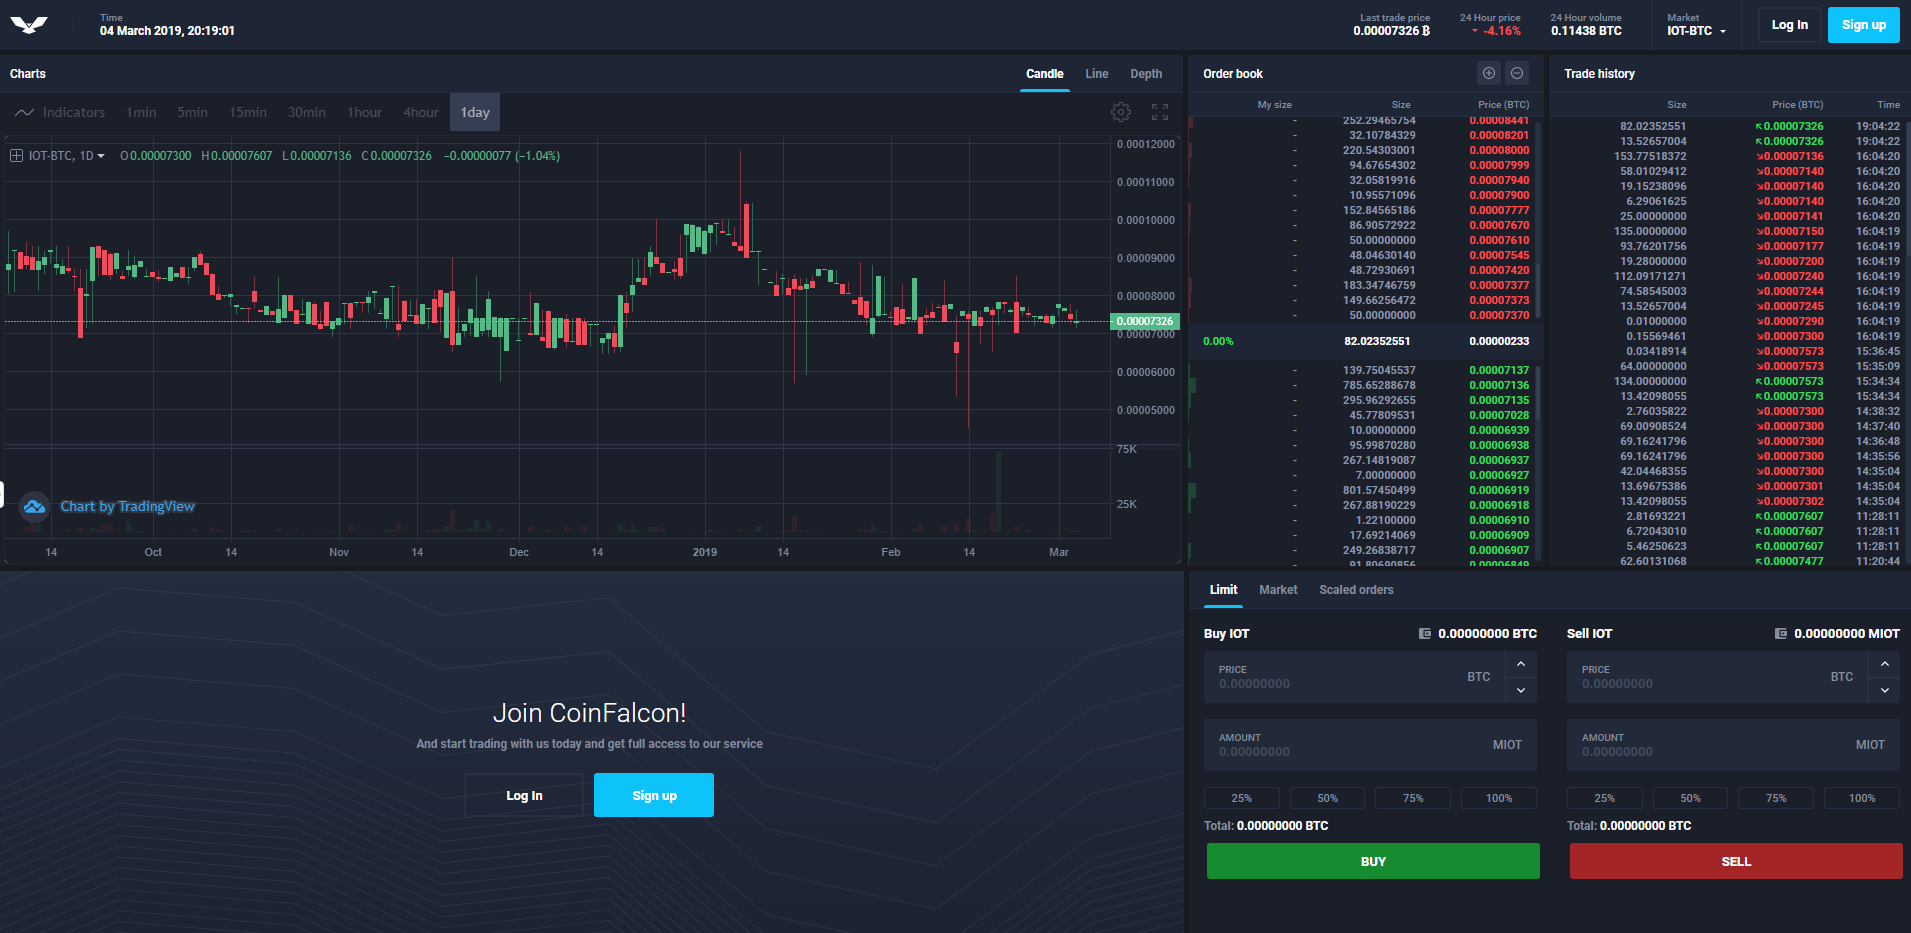 CoinFalcon Reviews & Ratings – Crypto Exchange : Revain